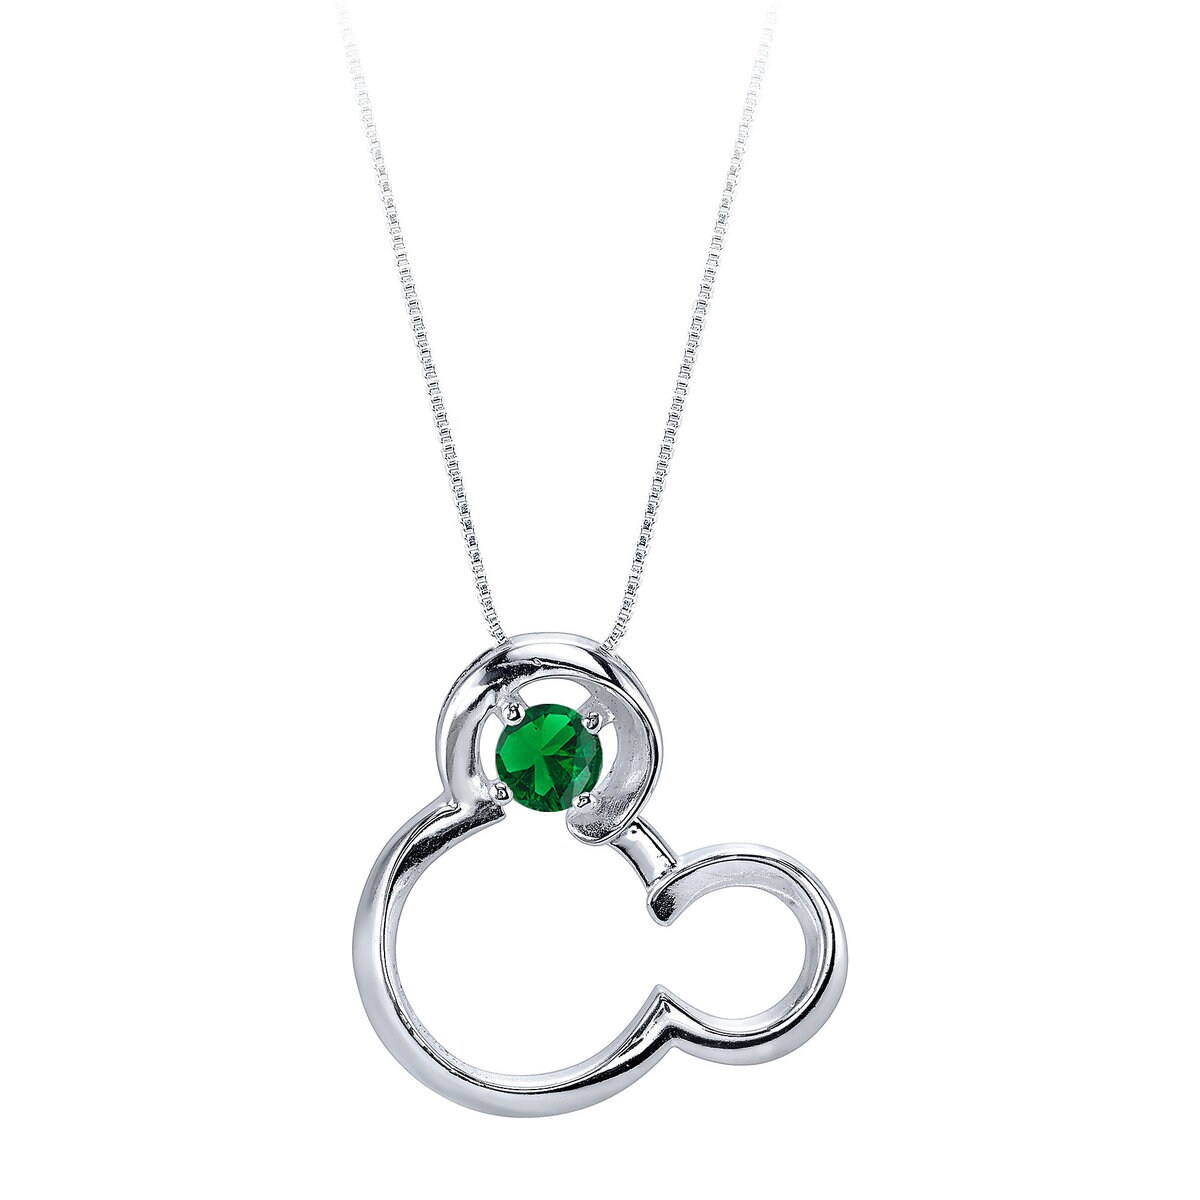 Product Image of Mickey Mouse May Birthstone Necklace for Women - Emerald # 1